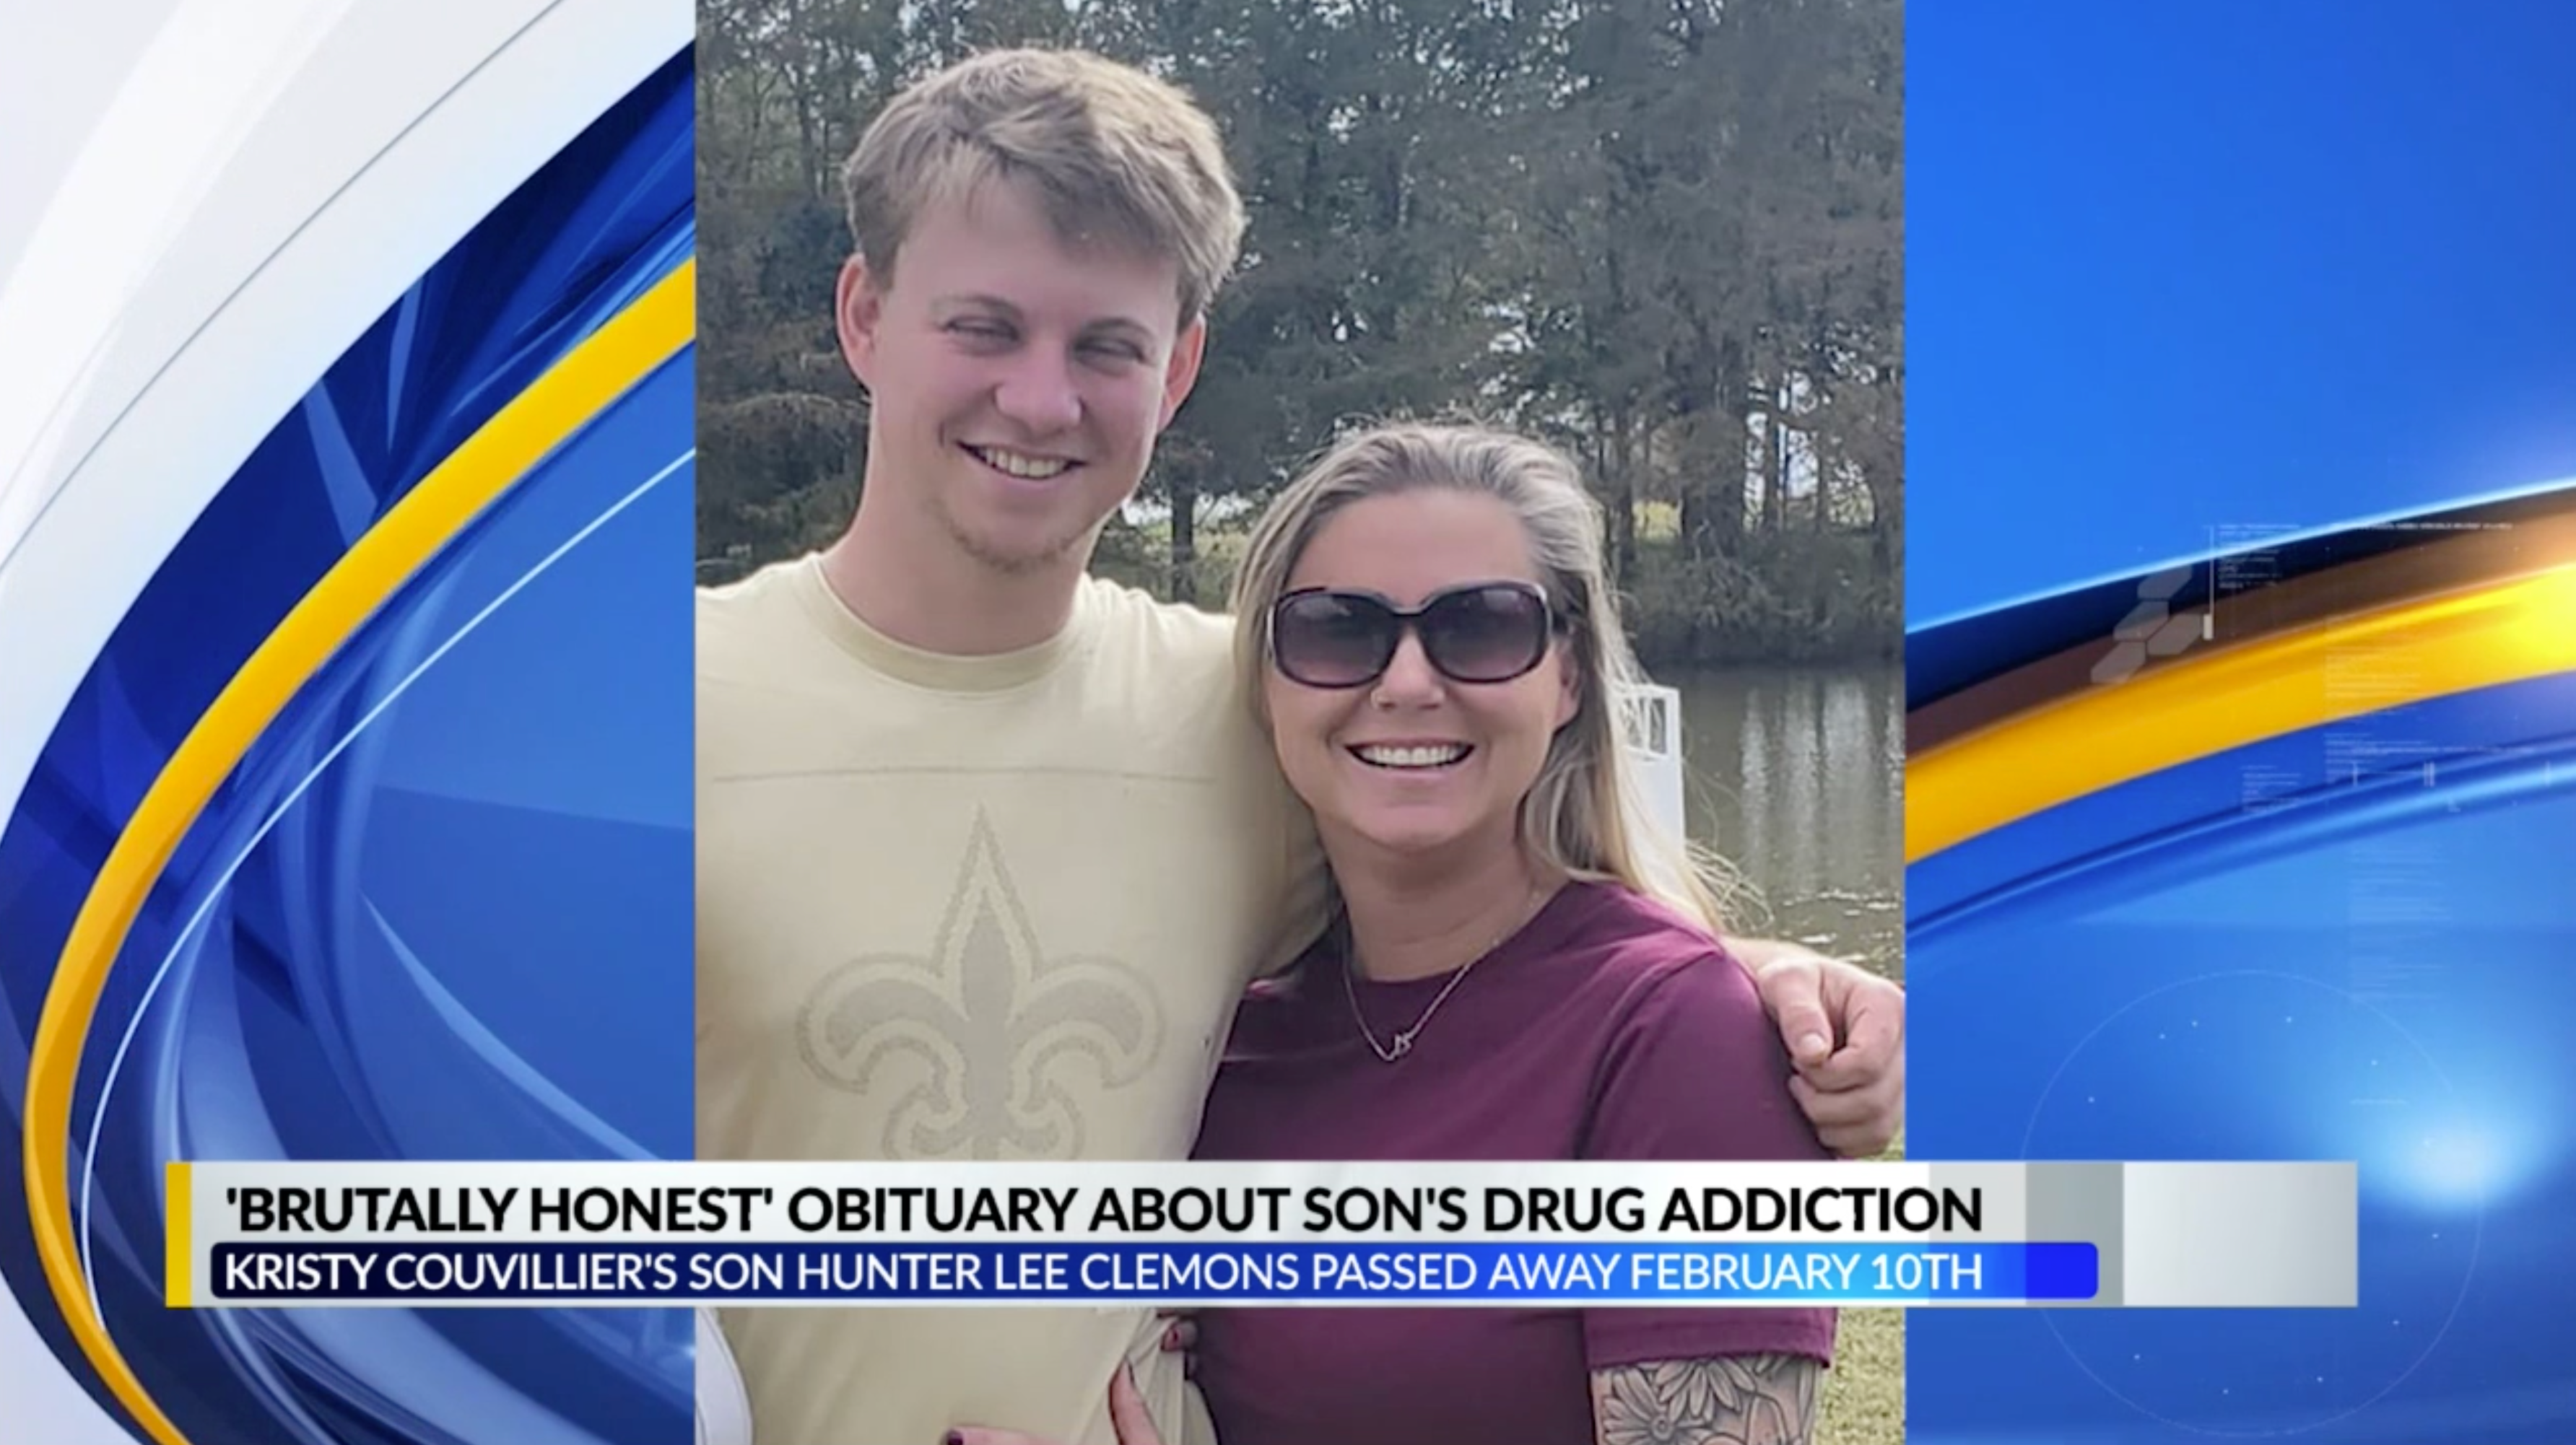 Christy Couvillier says her 22-year-old son, Hunter Lee Clemons, died of a drug overdose in February 2022